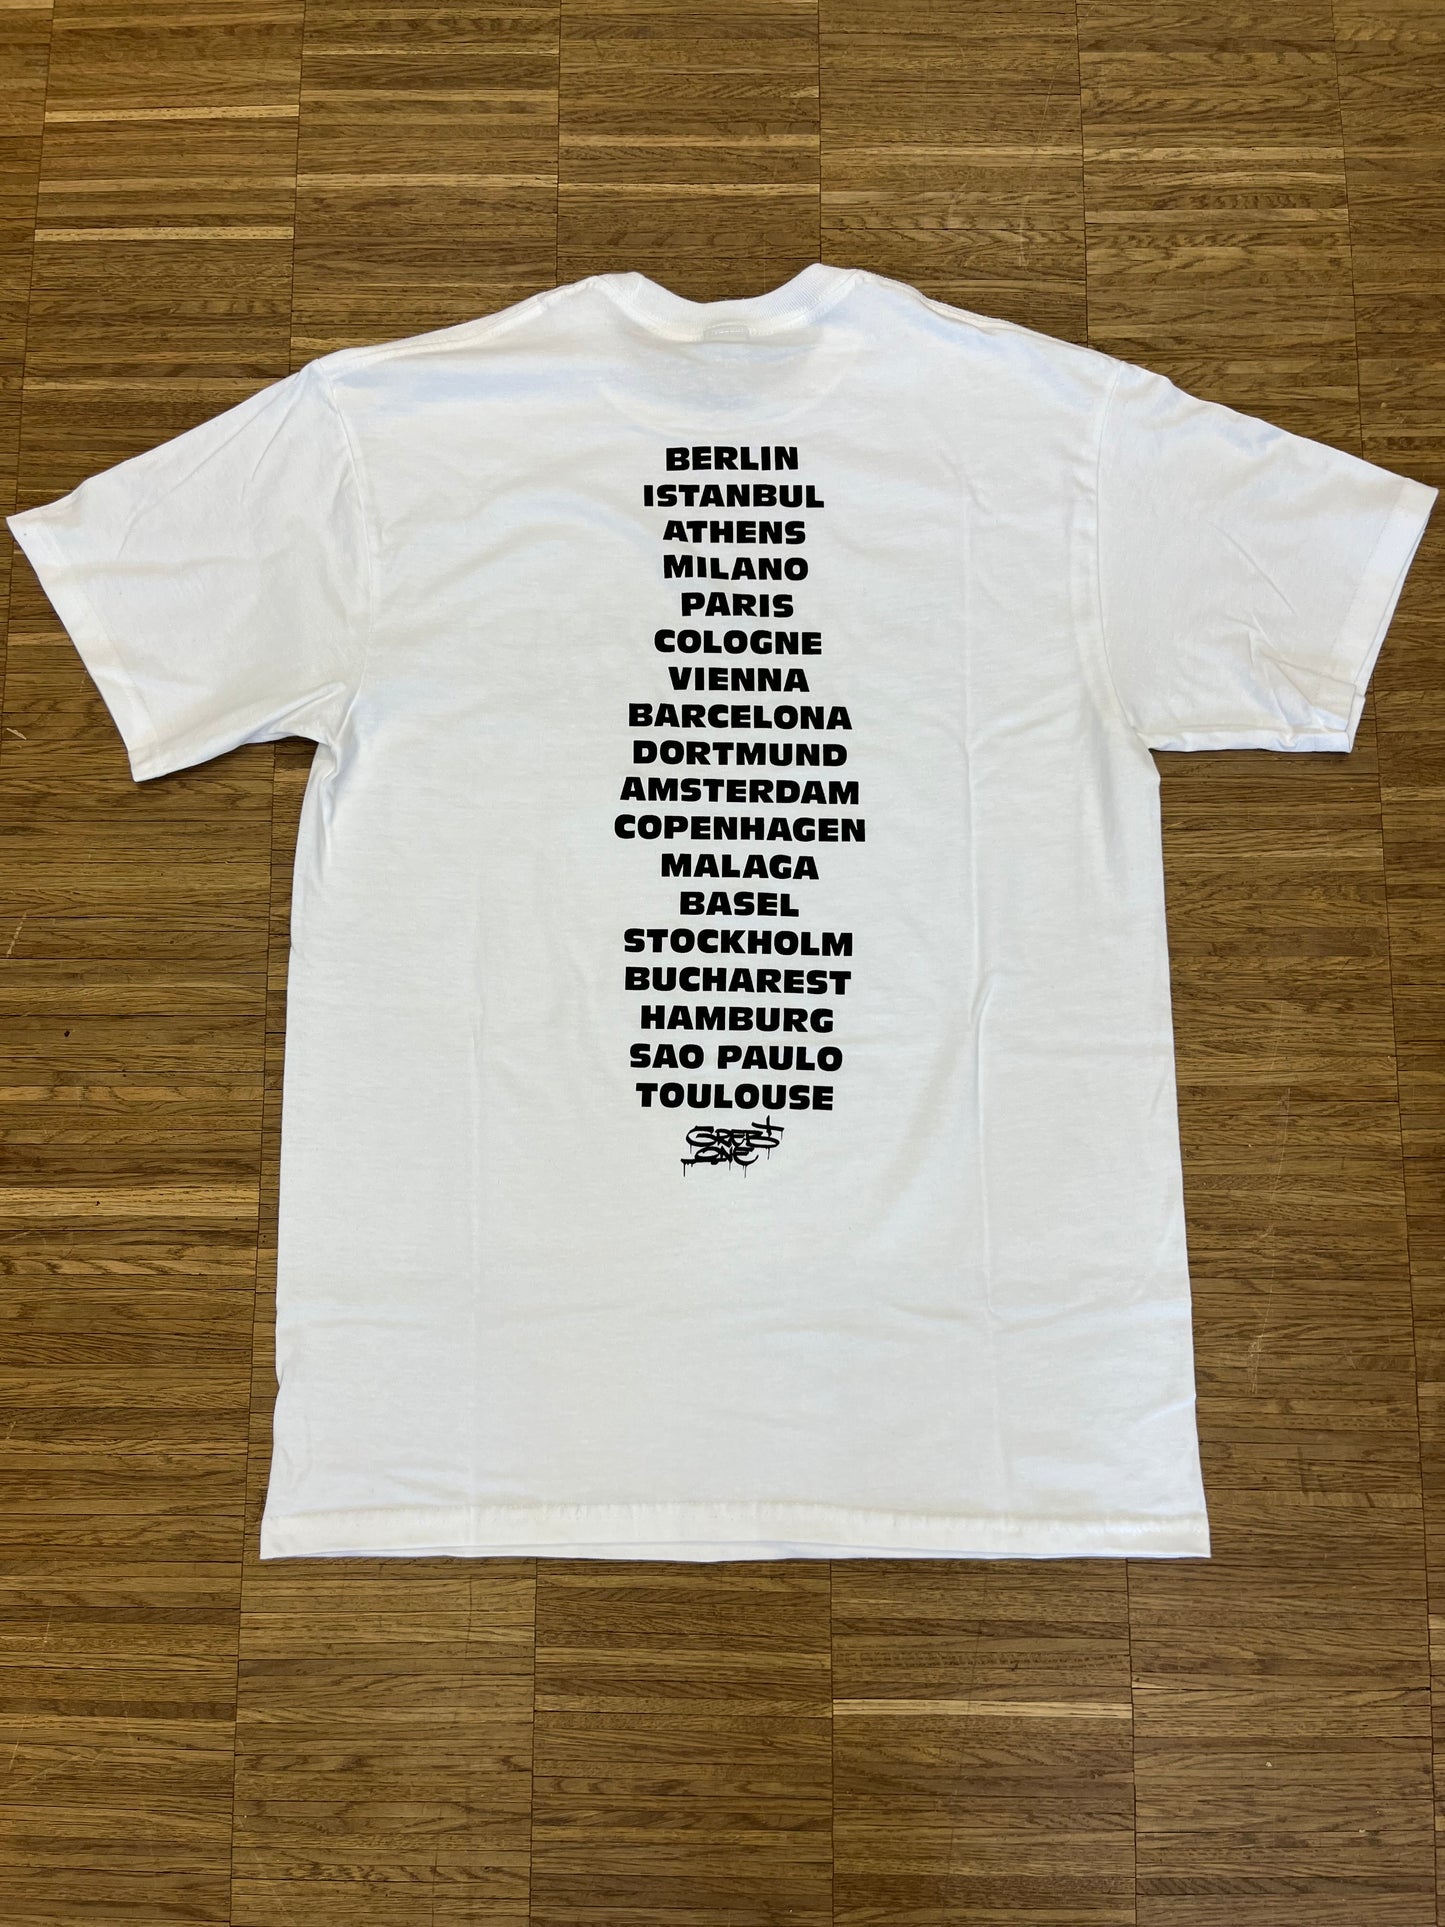 GREB "The Whole World Is Your Home" Shirt White